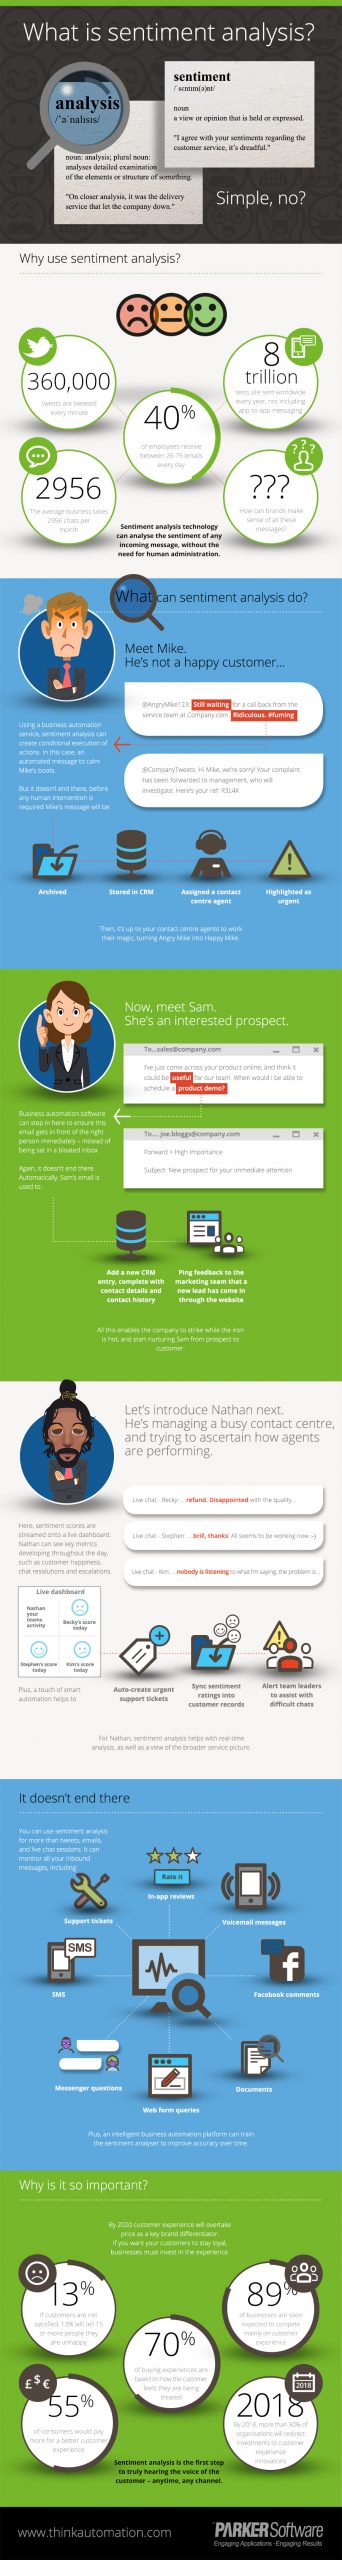 Info graphic - What is sentiment analysis?